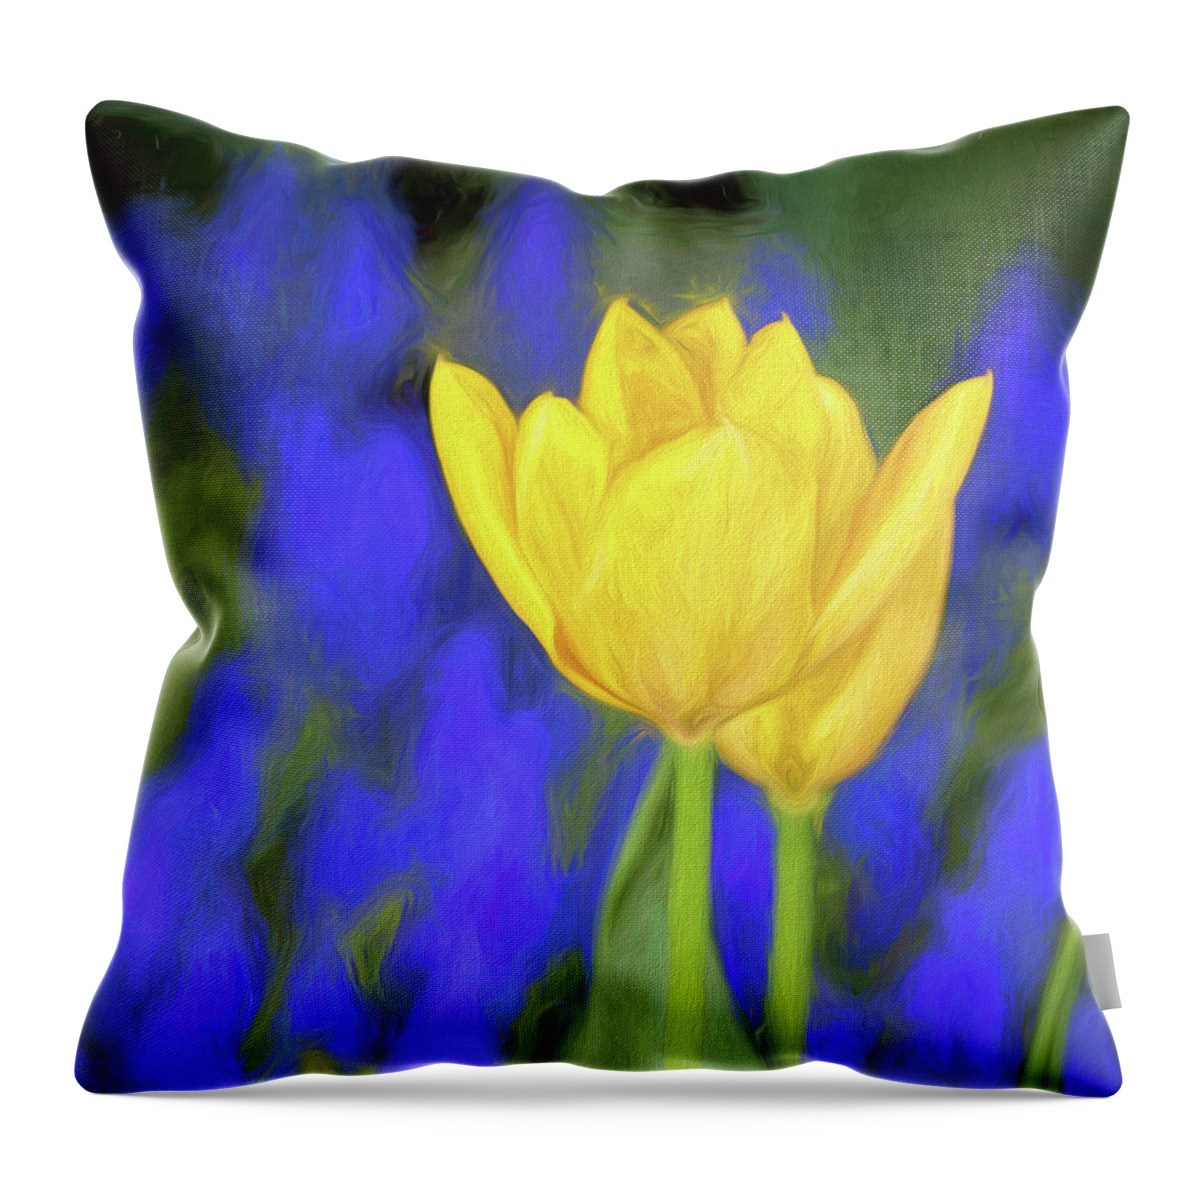 Tulips Throw Pillow featuring the mixed media Springtime Yellow Tulips Painterly by Carol Leigh